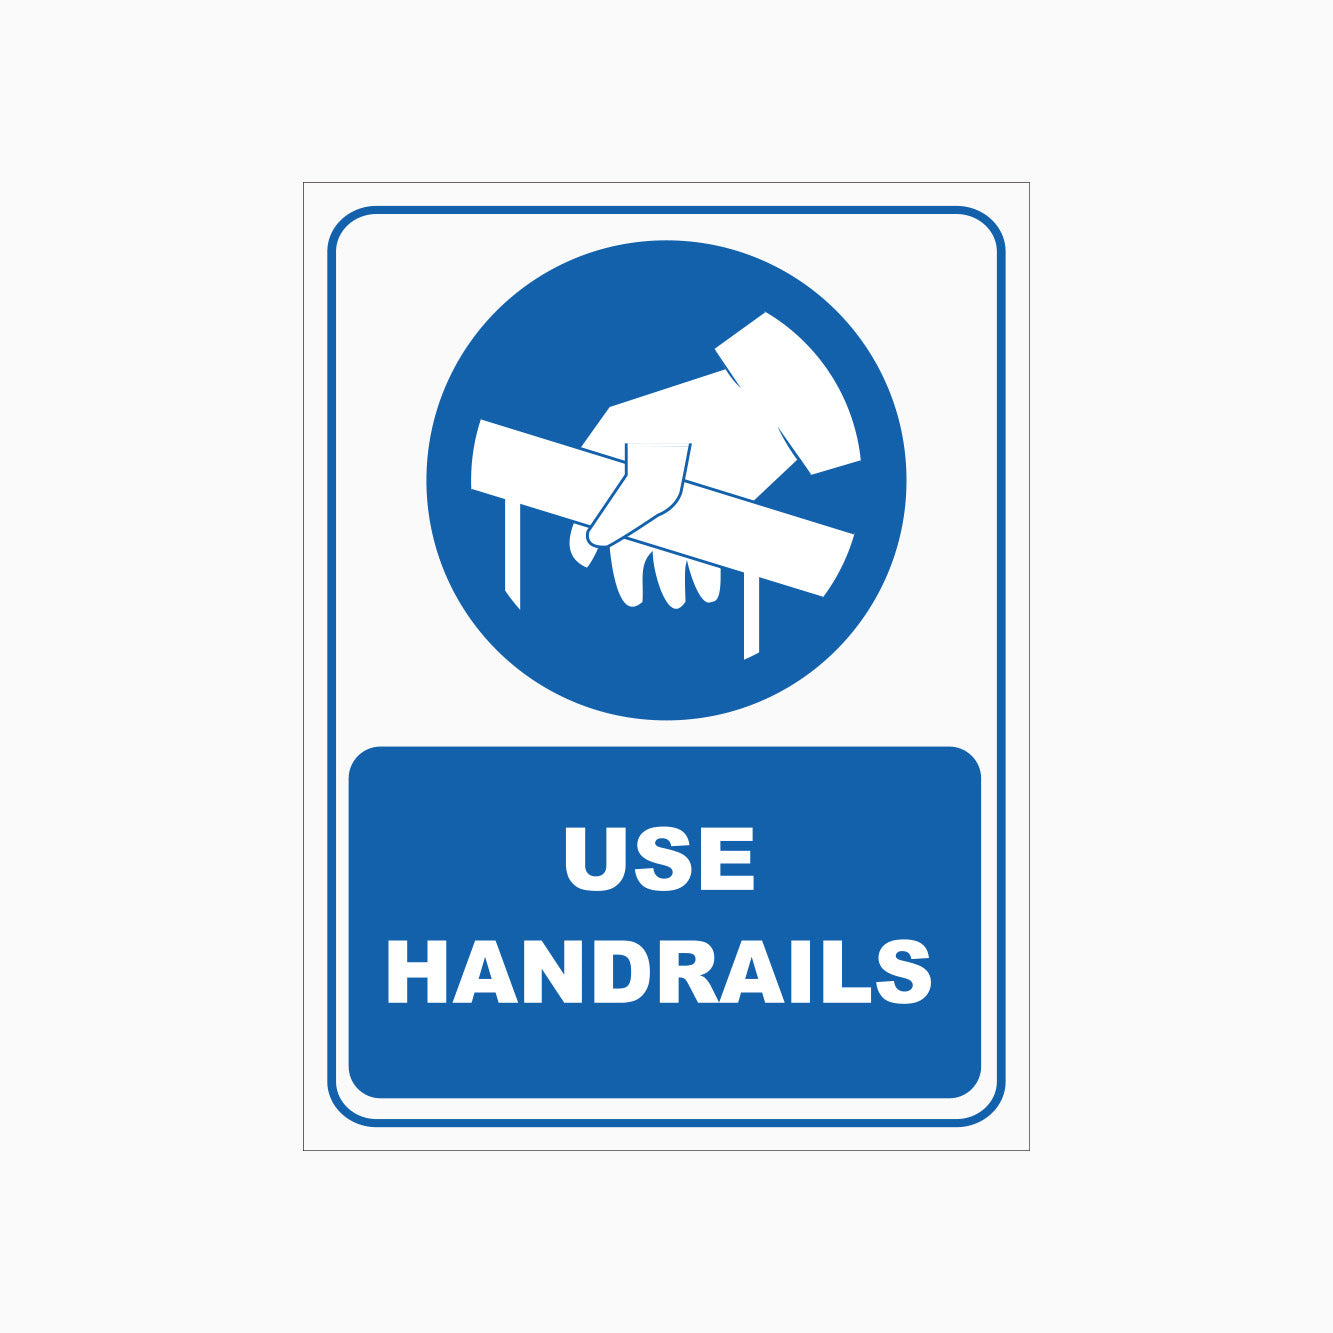 USE HANDRAILS SIGN